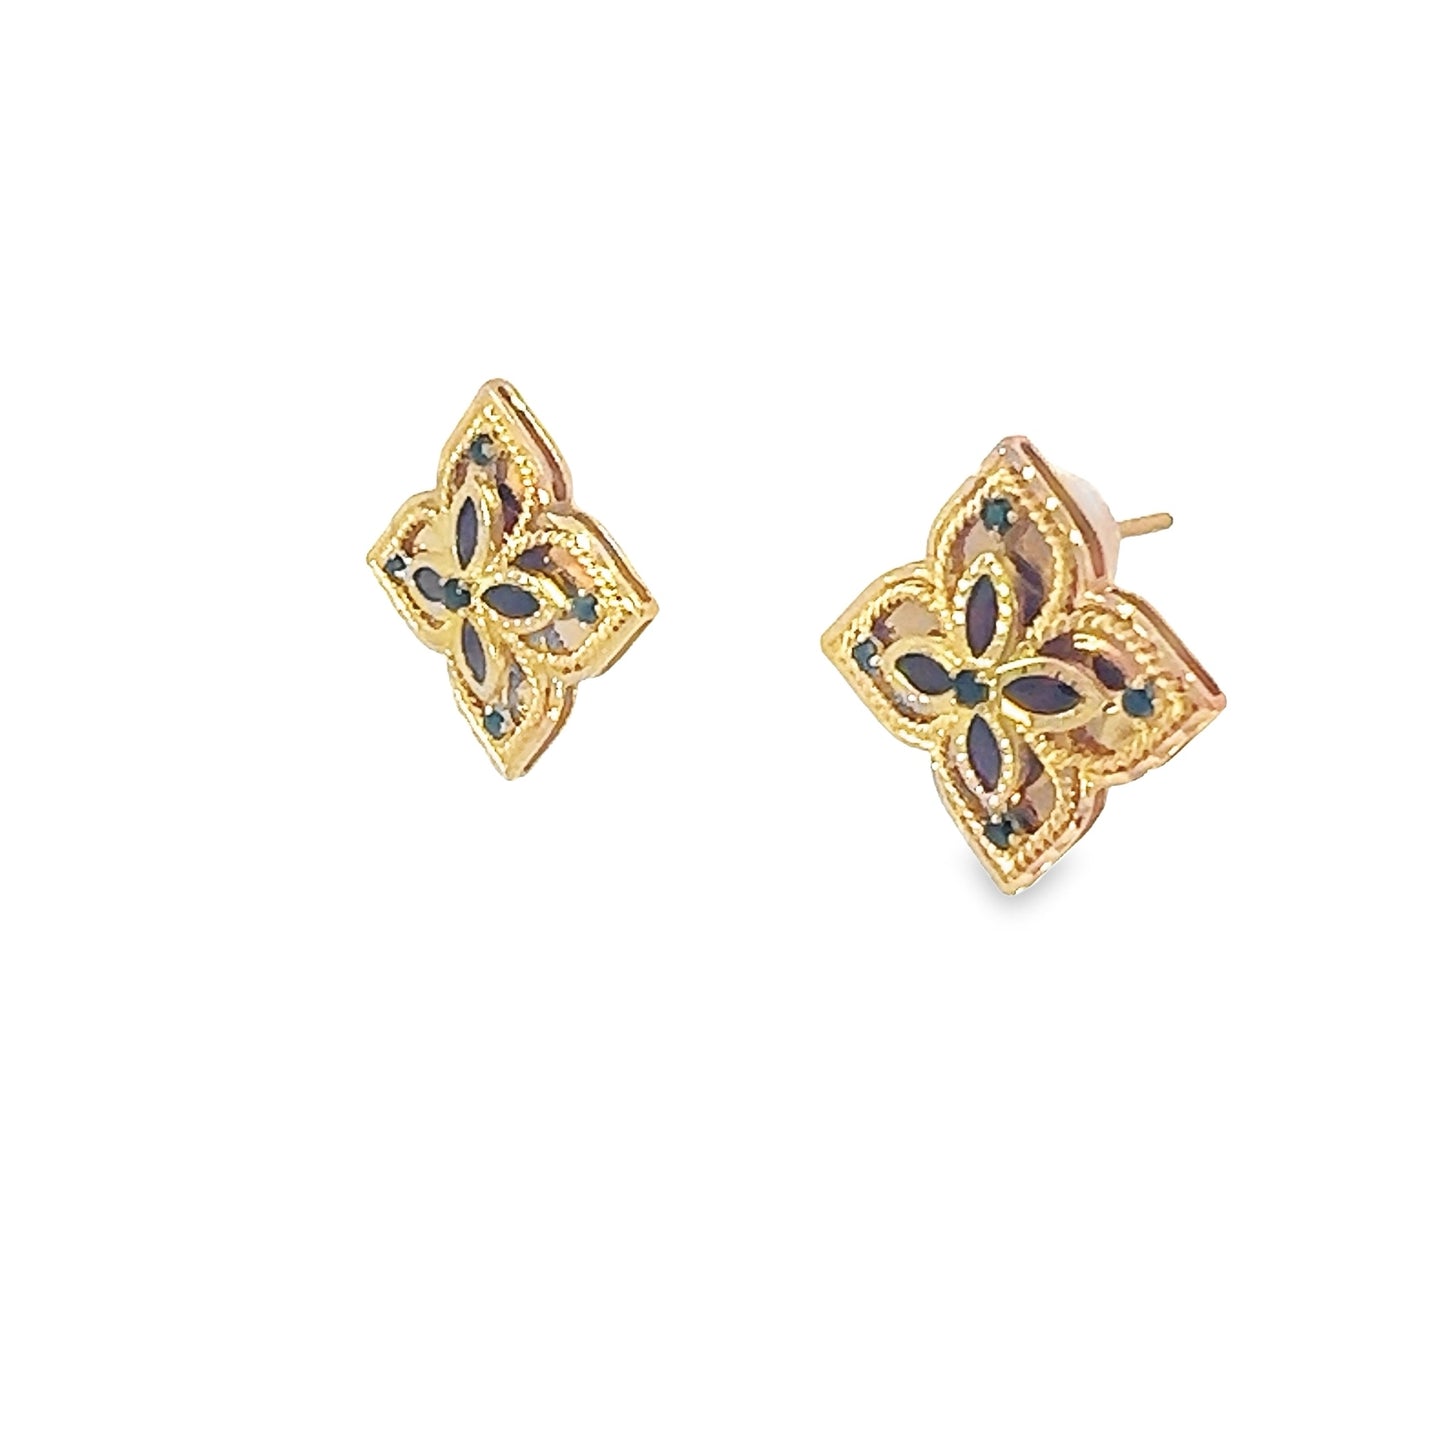 Turath Collection: 21k Flower Earrings - Colorful